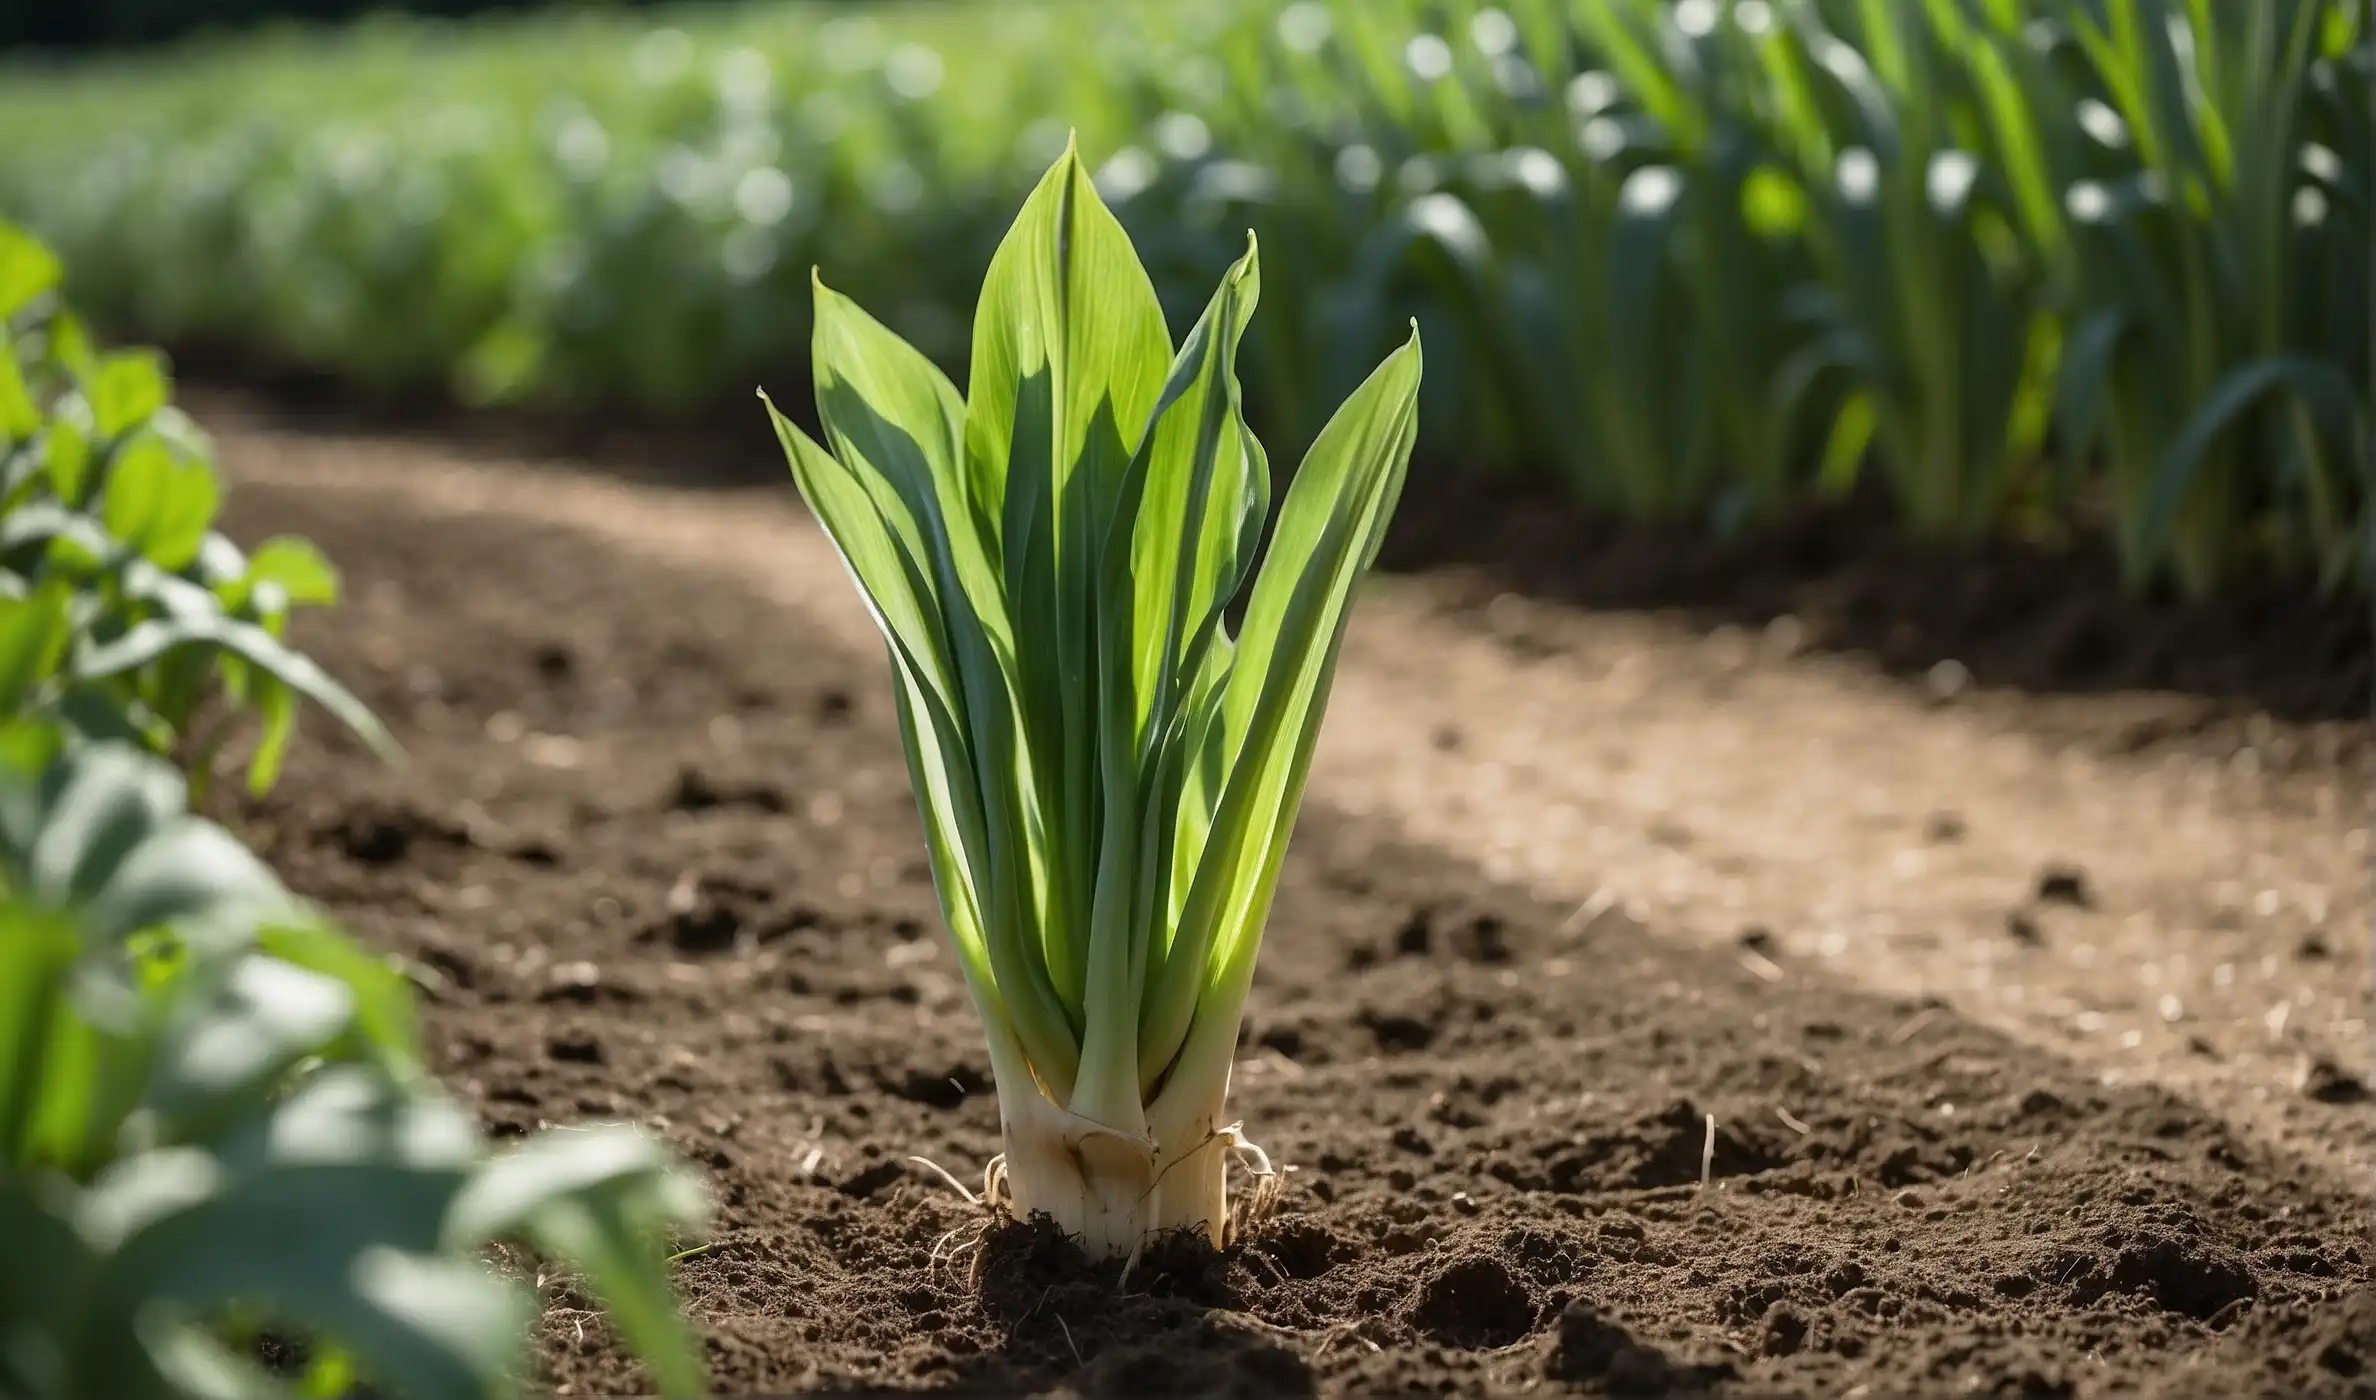 Leek, a tall leek standing in a vegetable garden with its long green leaves and white stalk